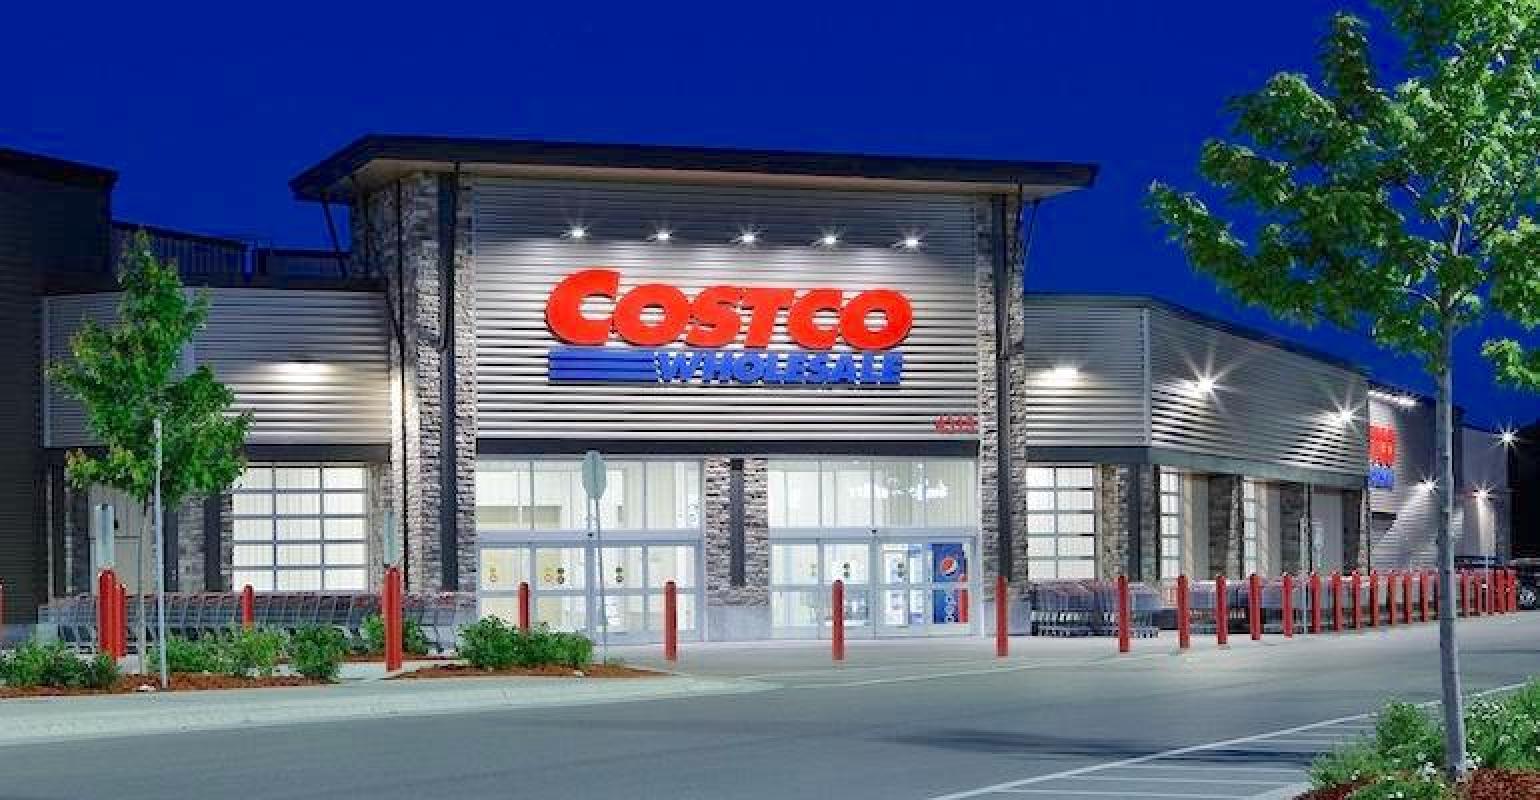 Costco earns kudos as Canada's 'most respected' grocer